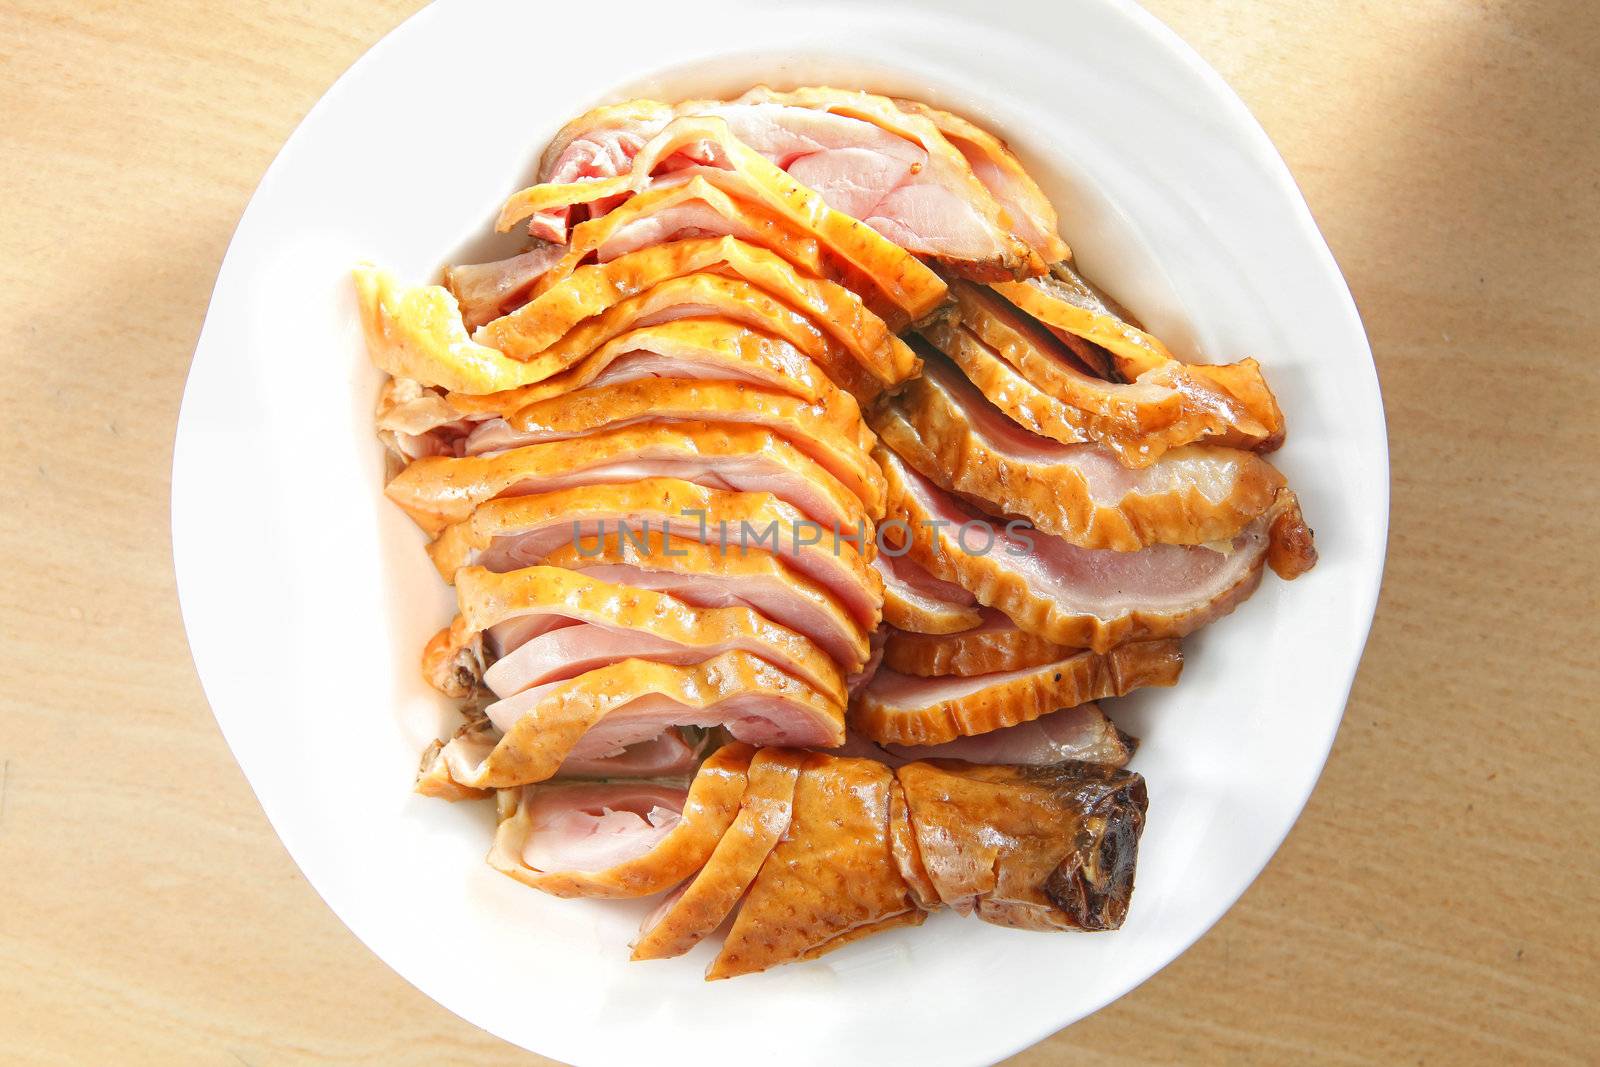 Sliced duck meat on the dish.